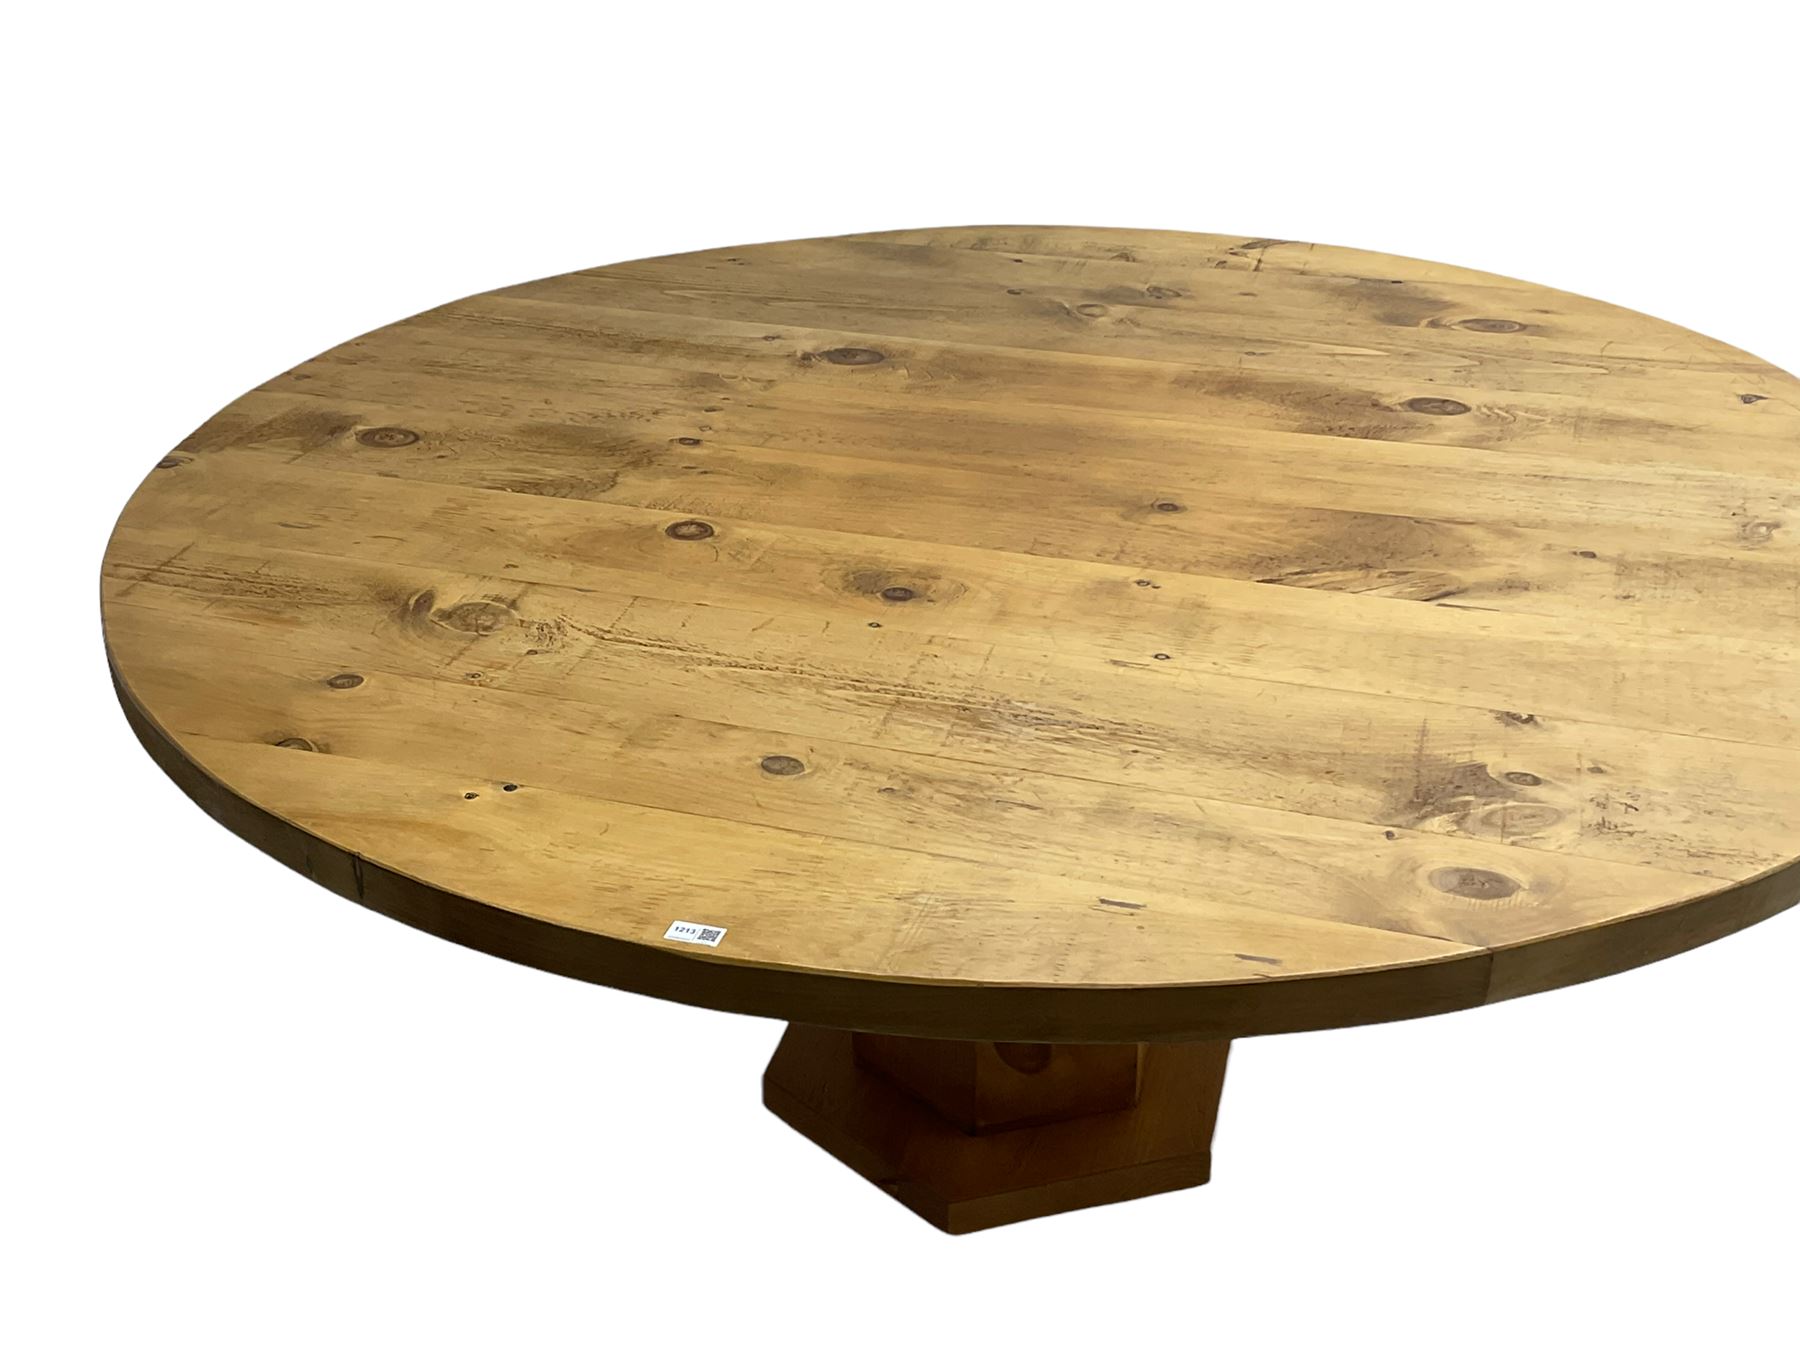 Large rustic waxed pine dining table - Image 2 of 6